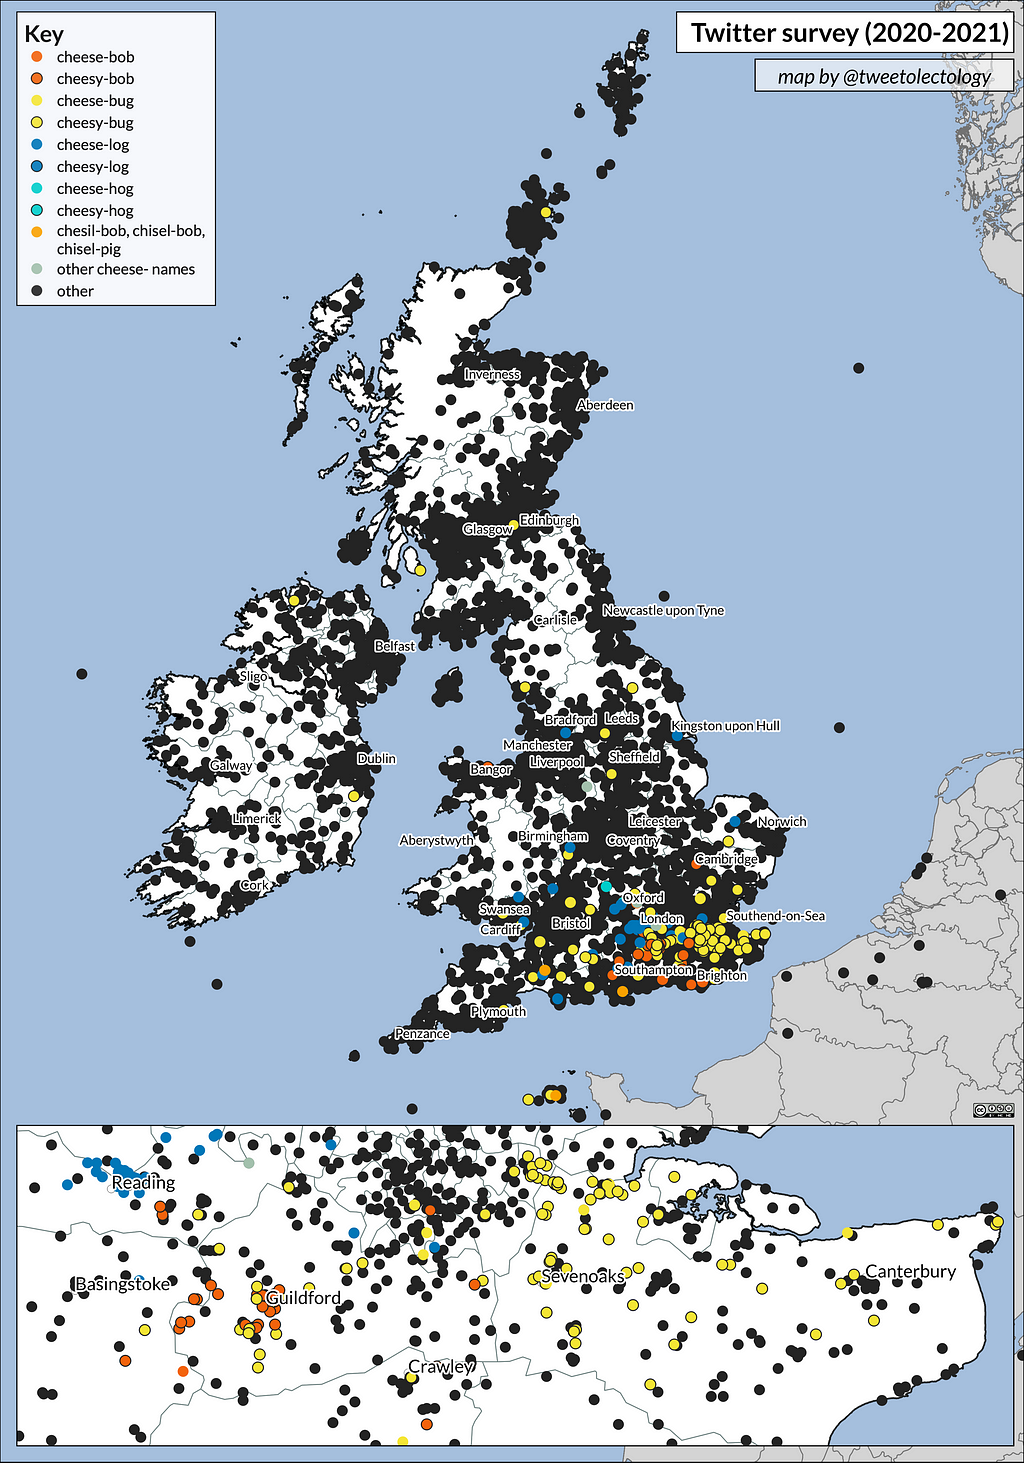 Occurrence map of names containing cheese- and their derivatives